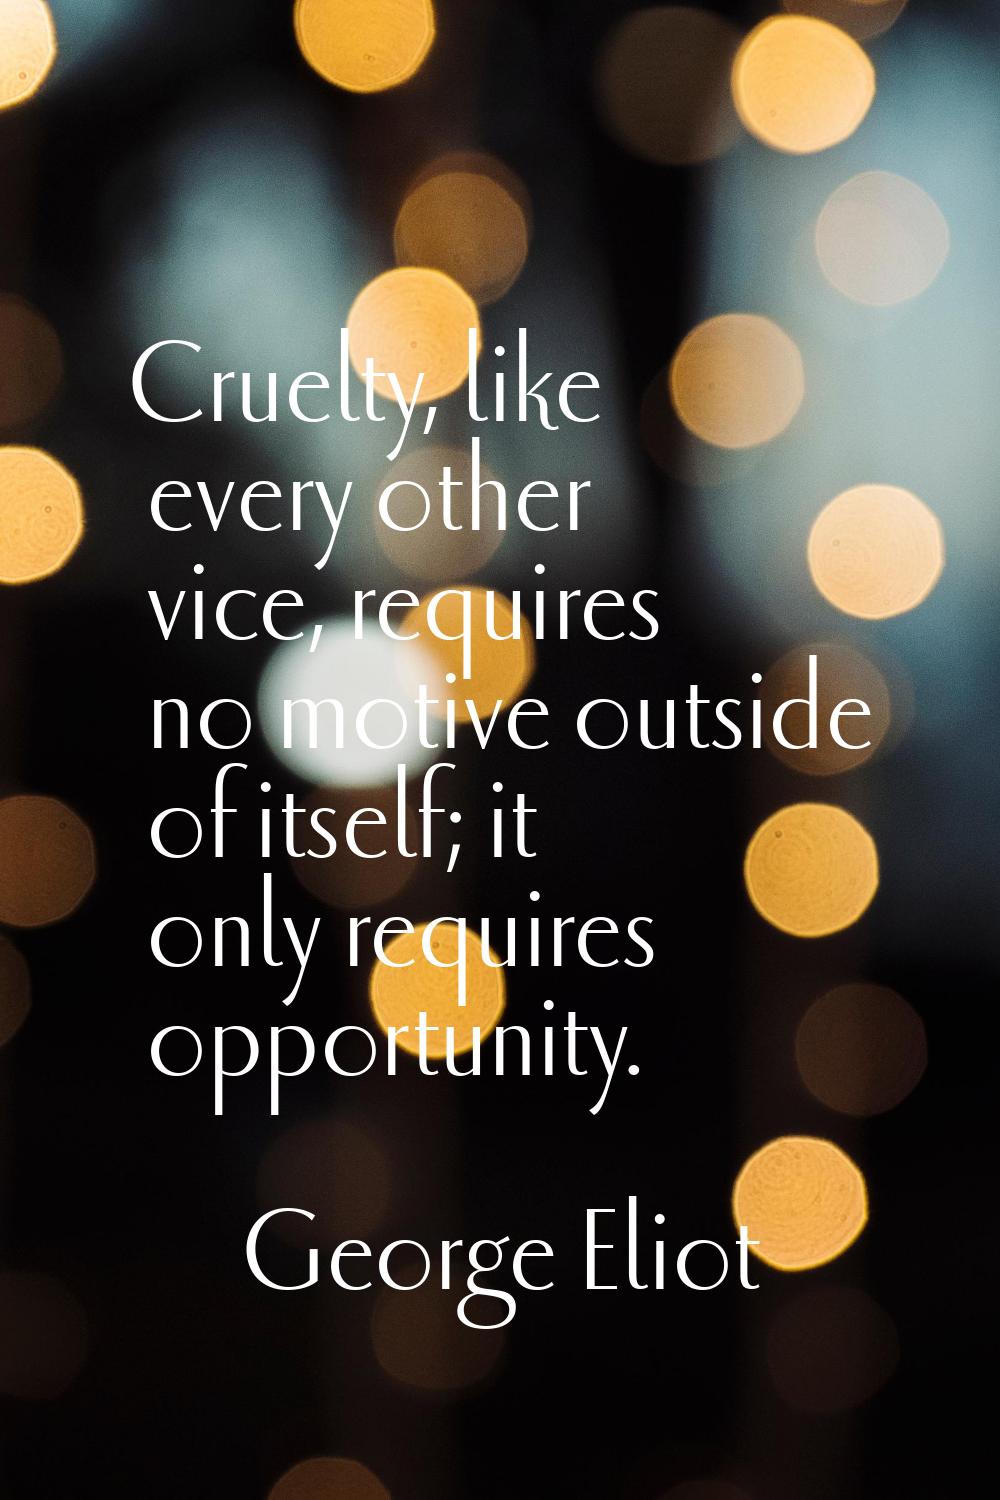 Cruelty, like every other vice, requires no motive outside of itself; it only requires opportunity.